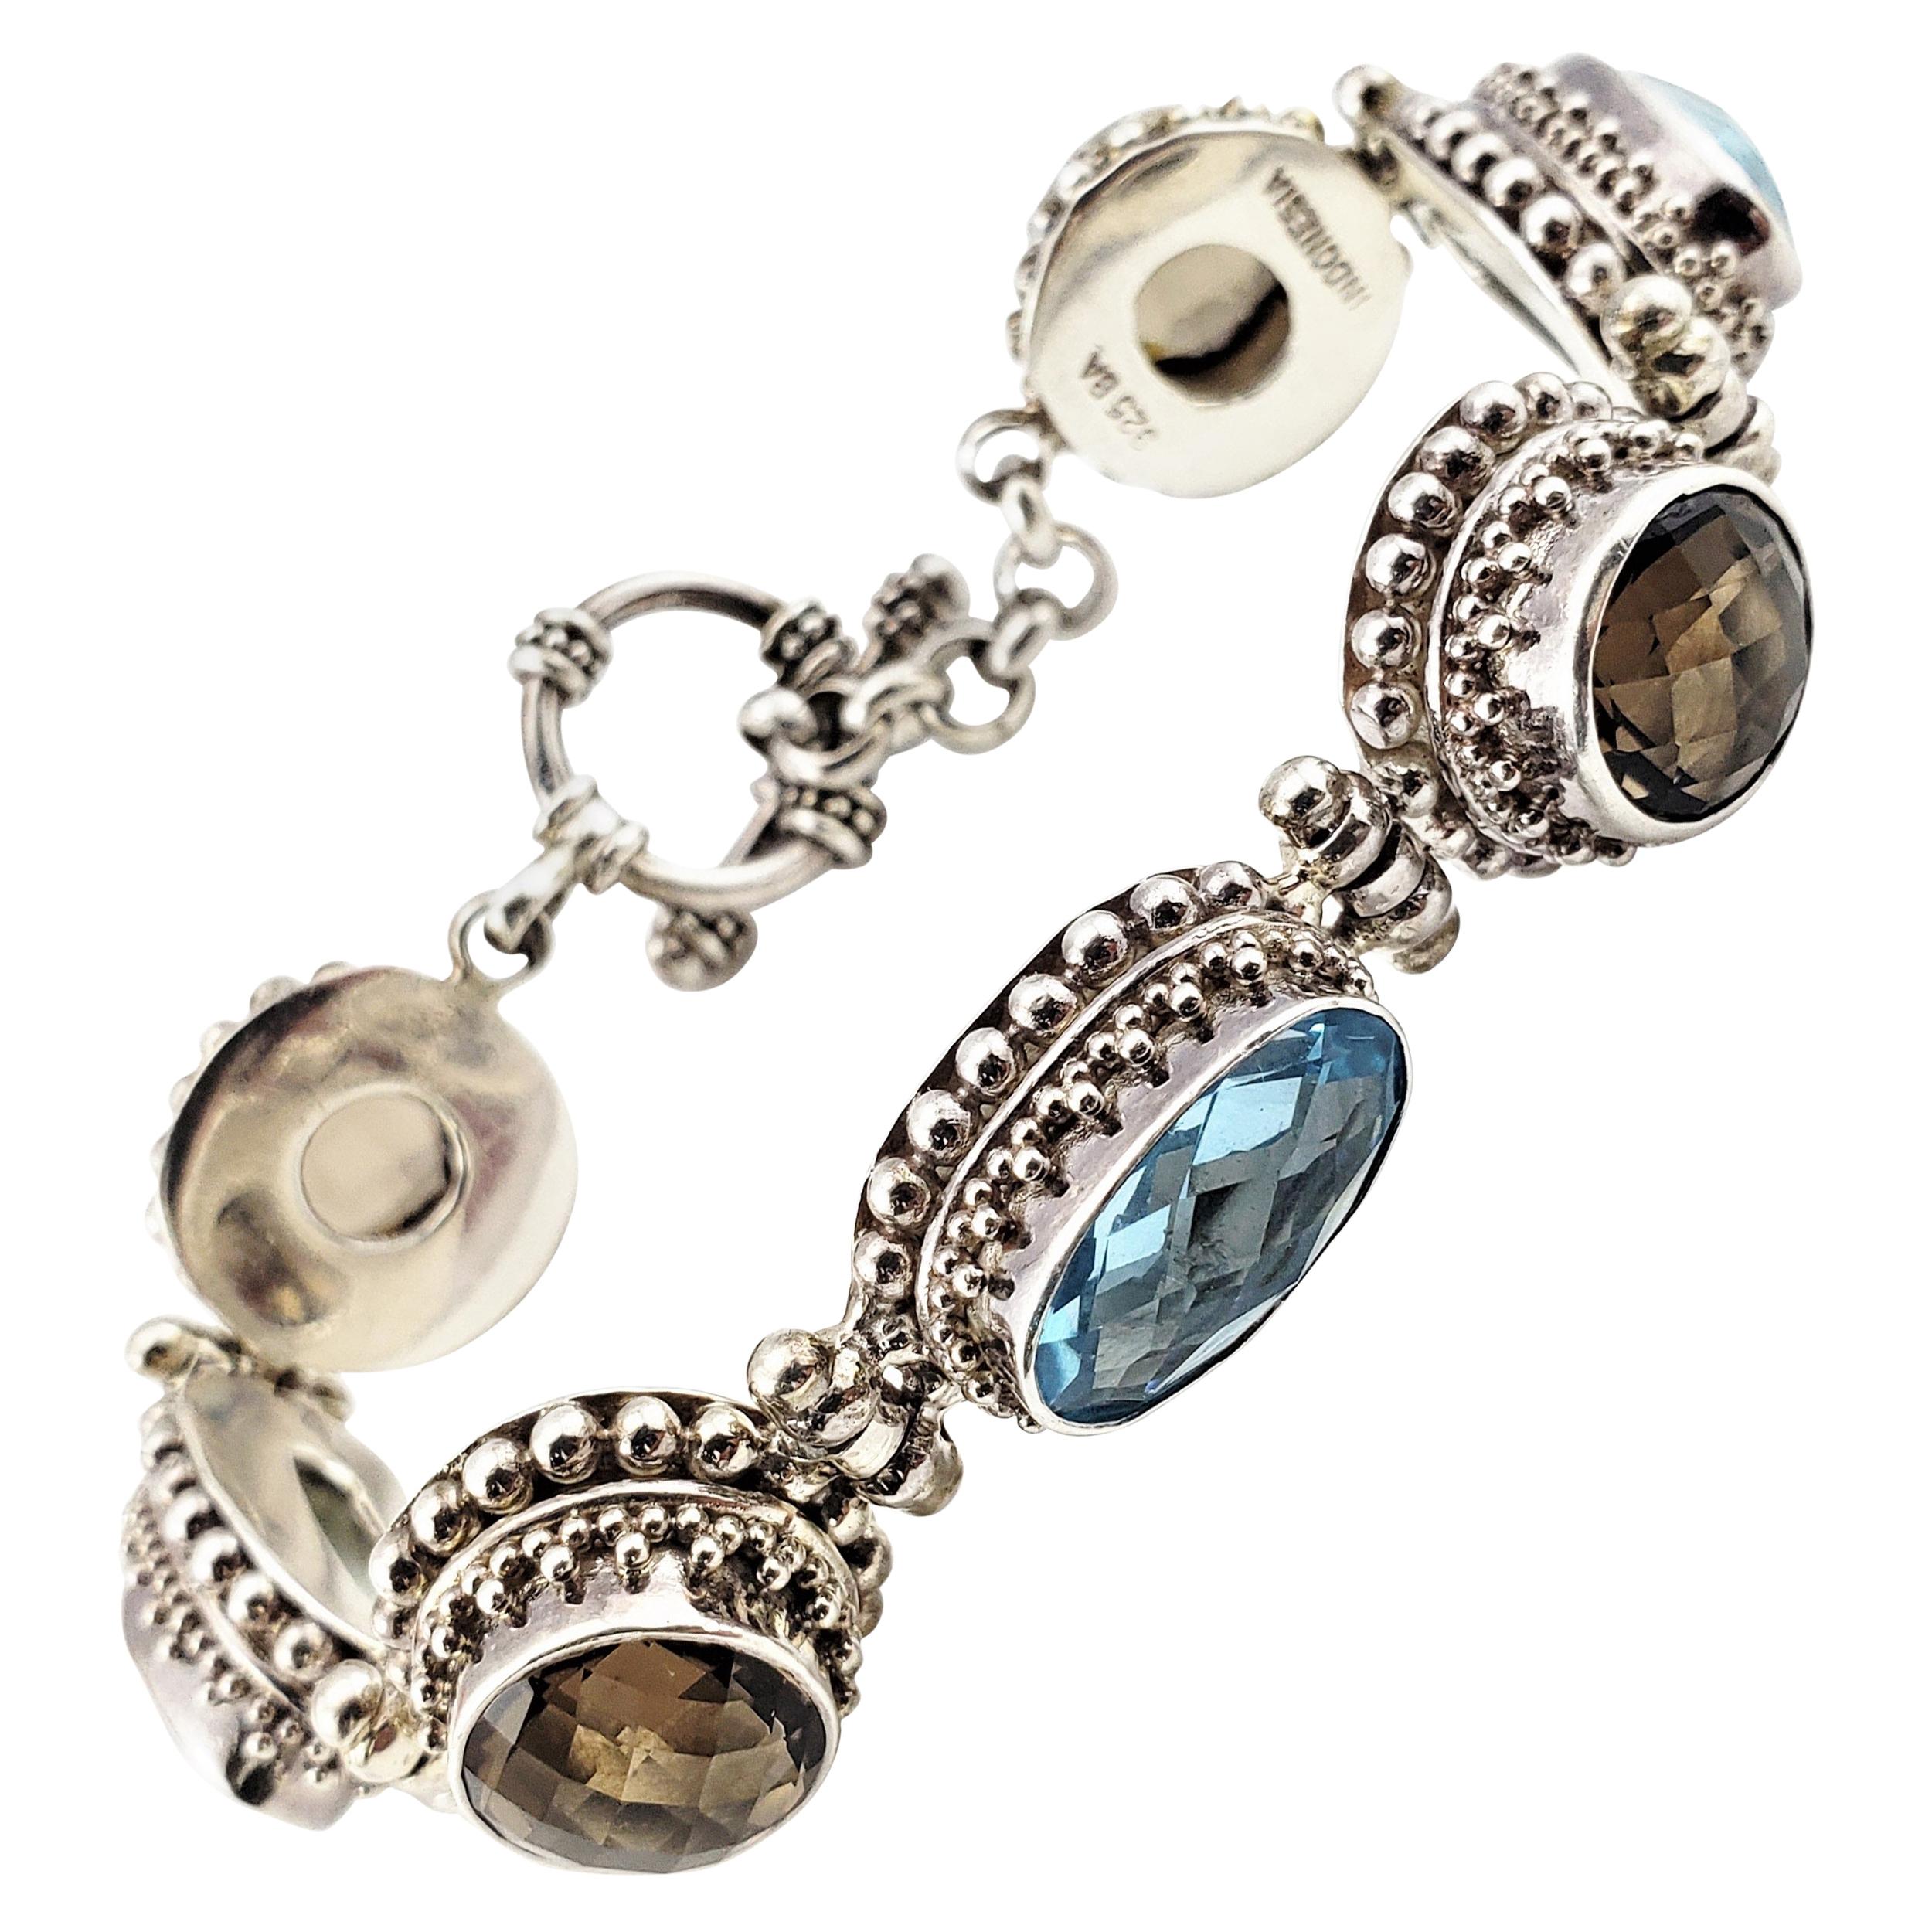 Bali Indonesia Sterling Silver Blue and Brown Topaz Flexible Toggle Bracelet